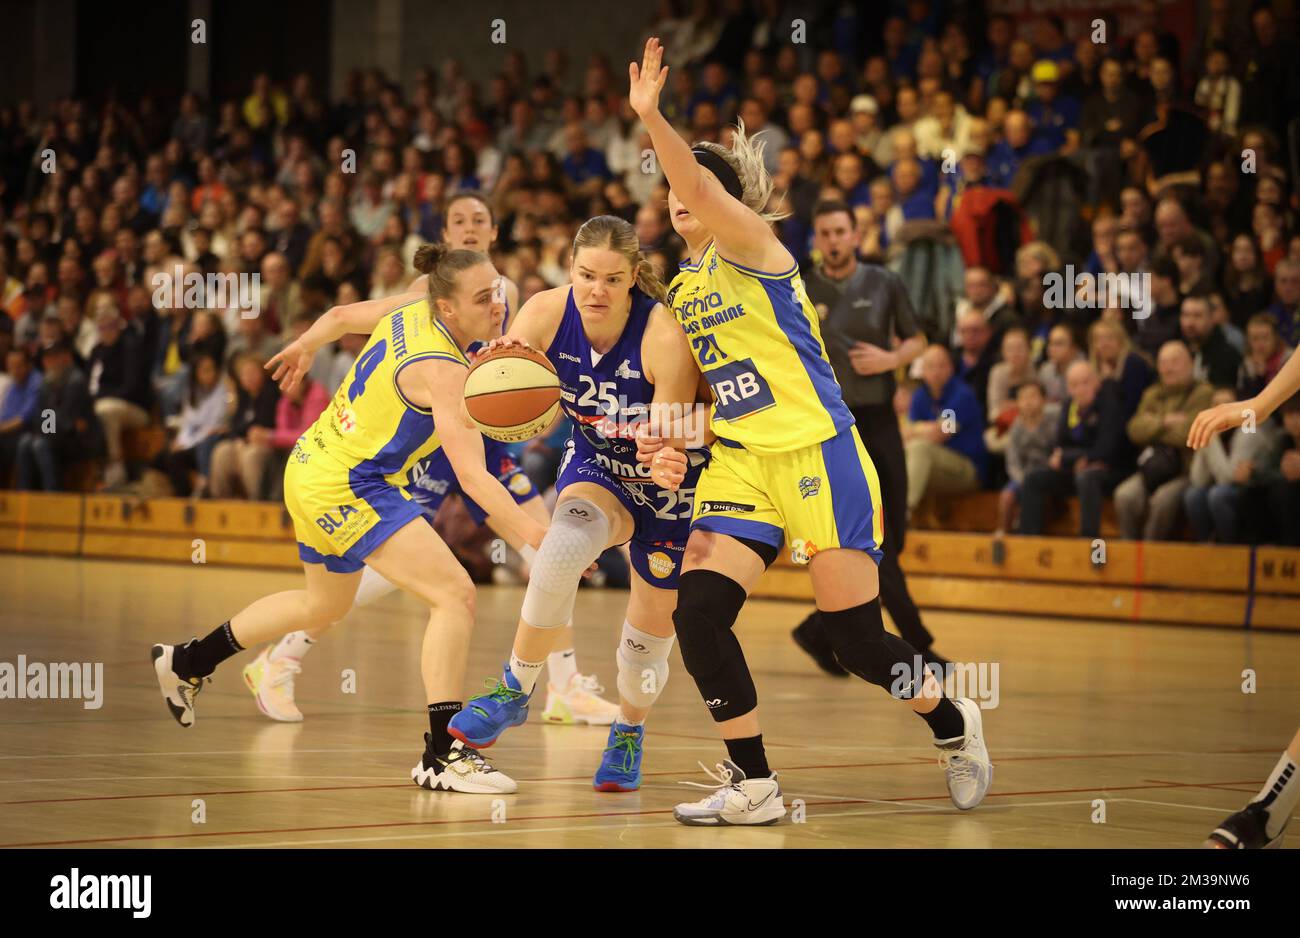 Castors' Elise Ramette, Mechelen's Becky Massey and Castor's Jessica  Lindstrom fight for the ball during the basketball match between Castors  Braine and Kangoeroes Mechelen, Tuesday 26 April 2022 in Braine-L'Alleud,  second game (